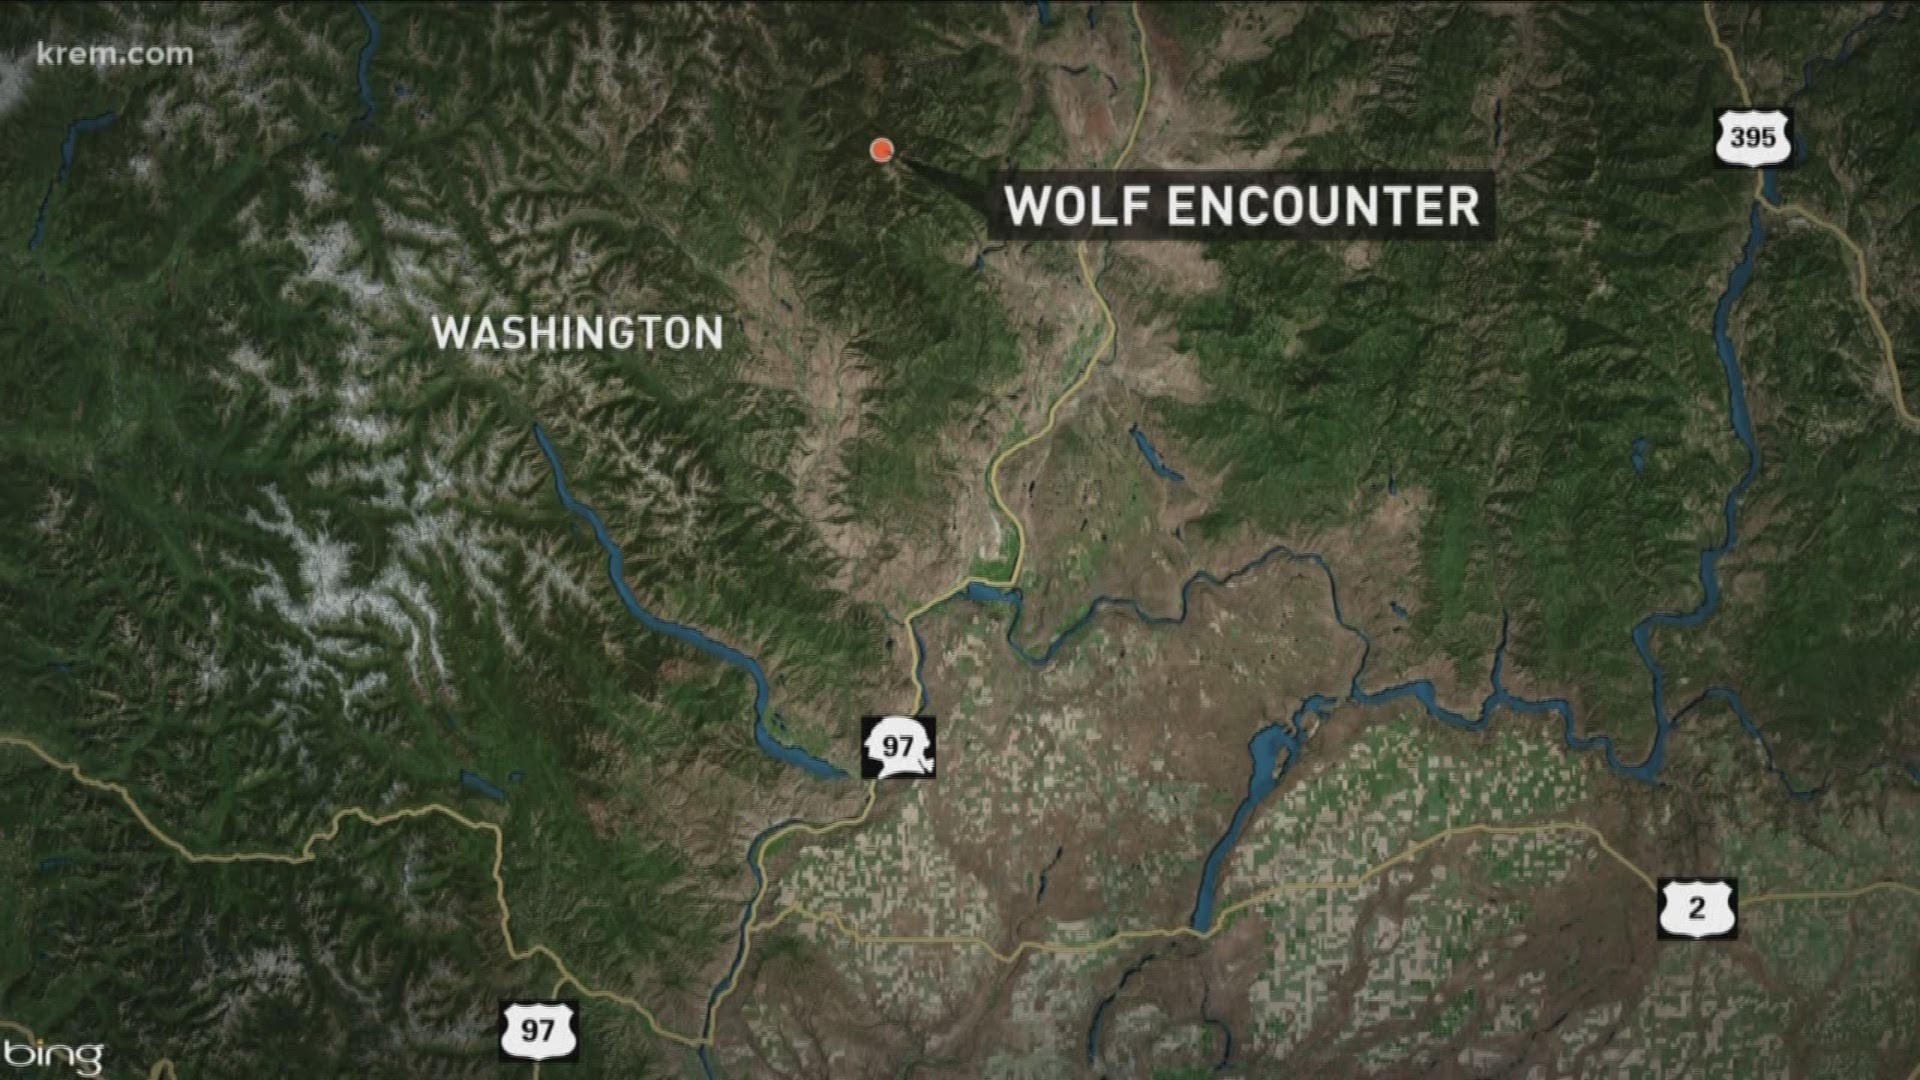 Research student climbs tree in Okanogan Co. to escape wolf pack, helicopter sent in to rescue her